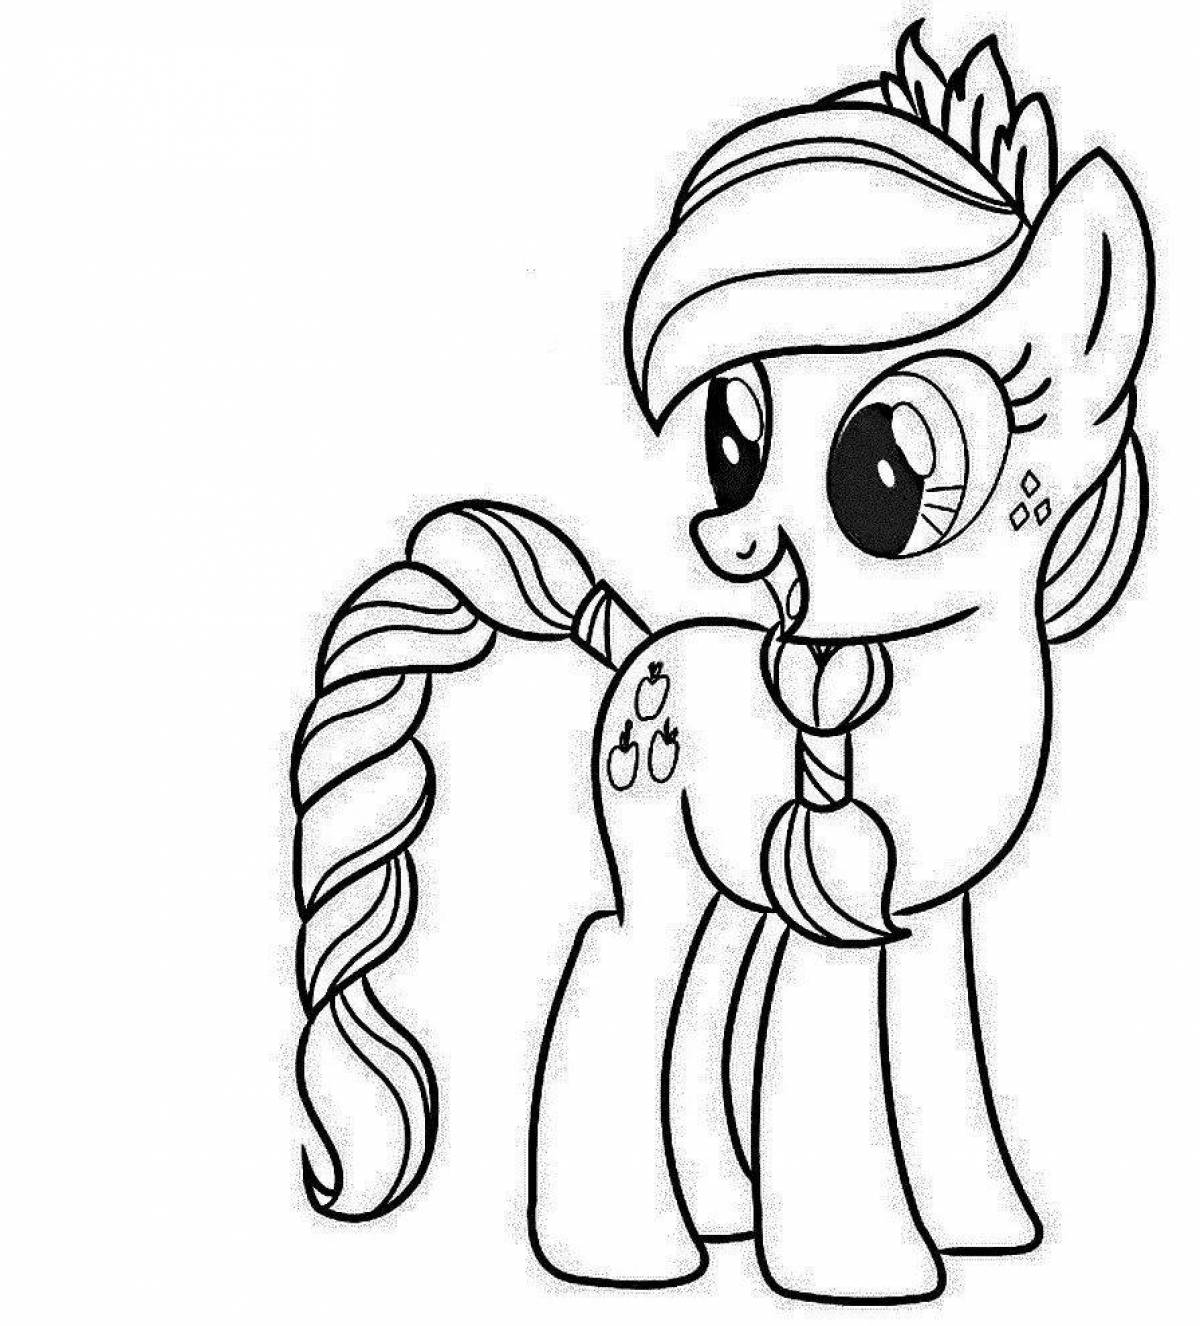 Amazing little pony coloring pages for kids